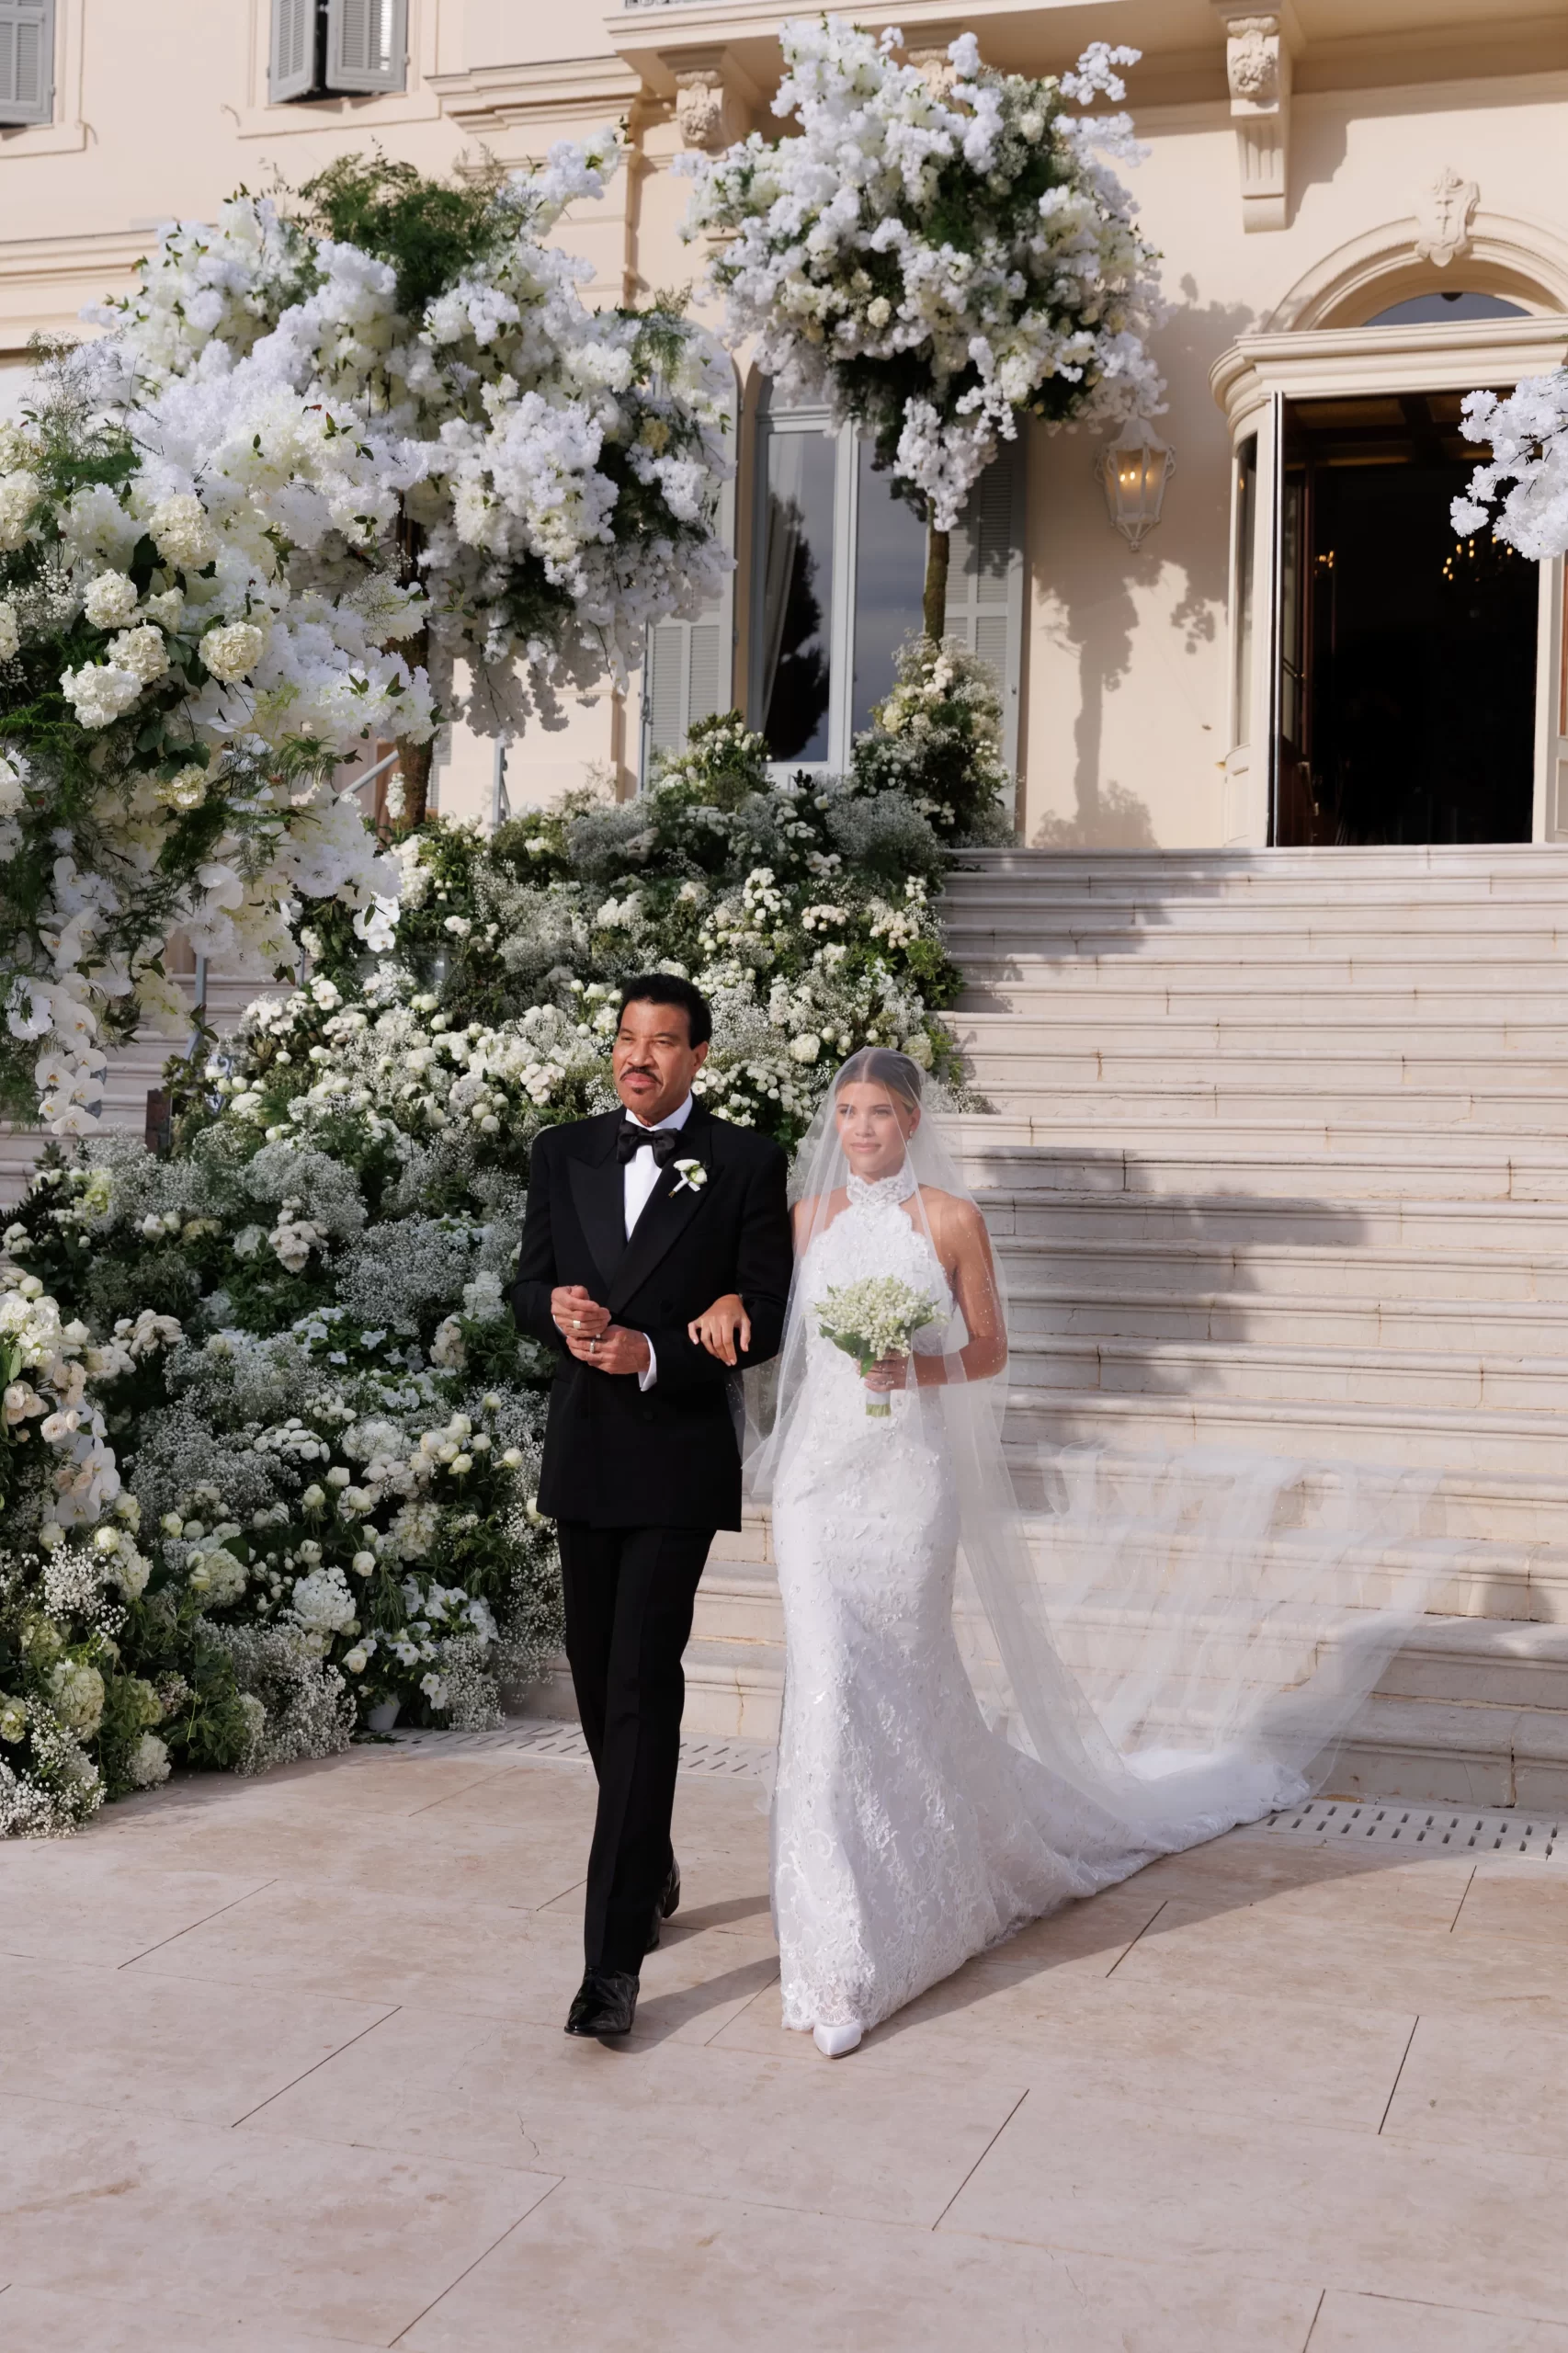 The wedding of two nepotism babies in France is the dream wedding of today  – The Central Trend